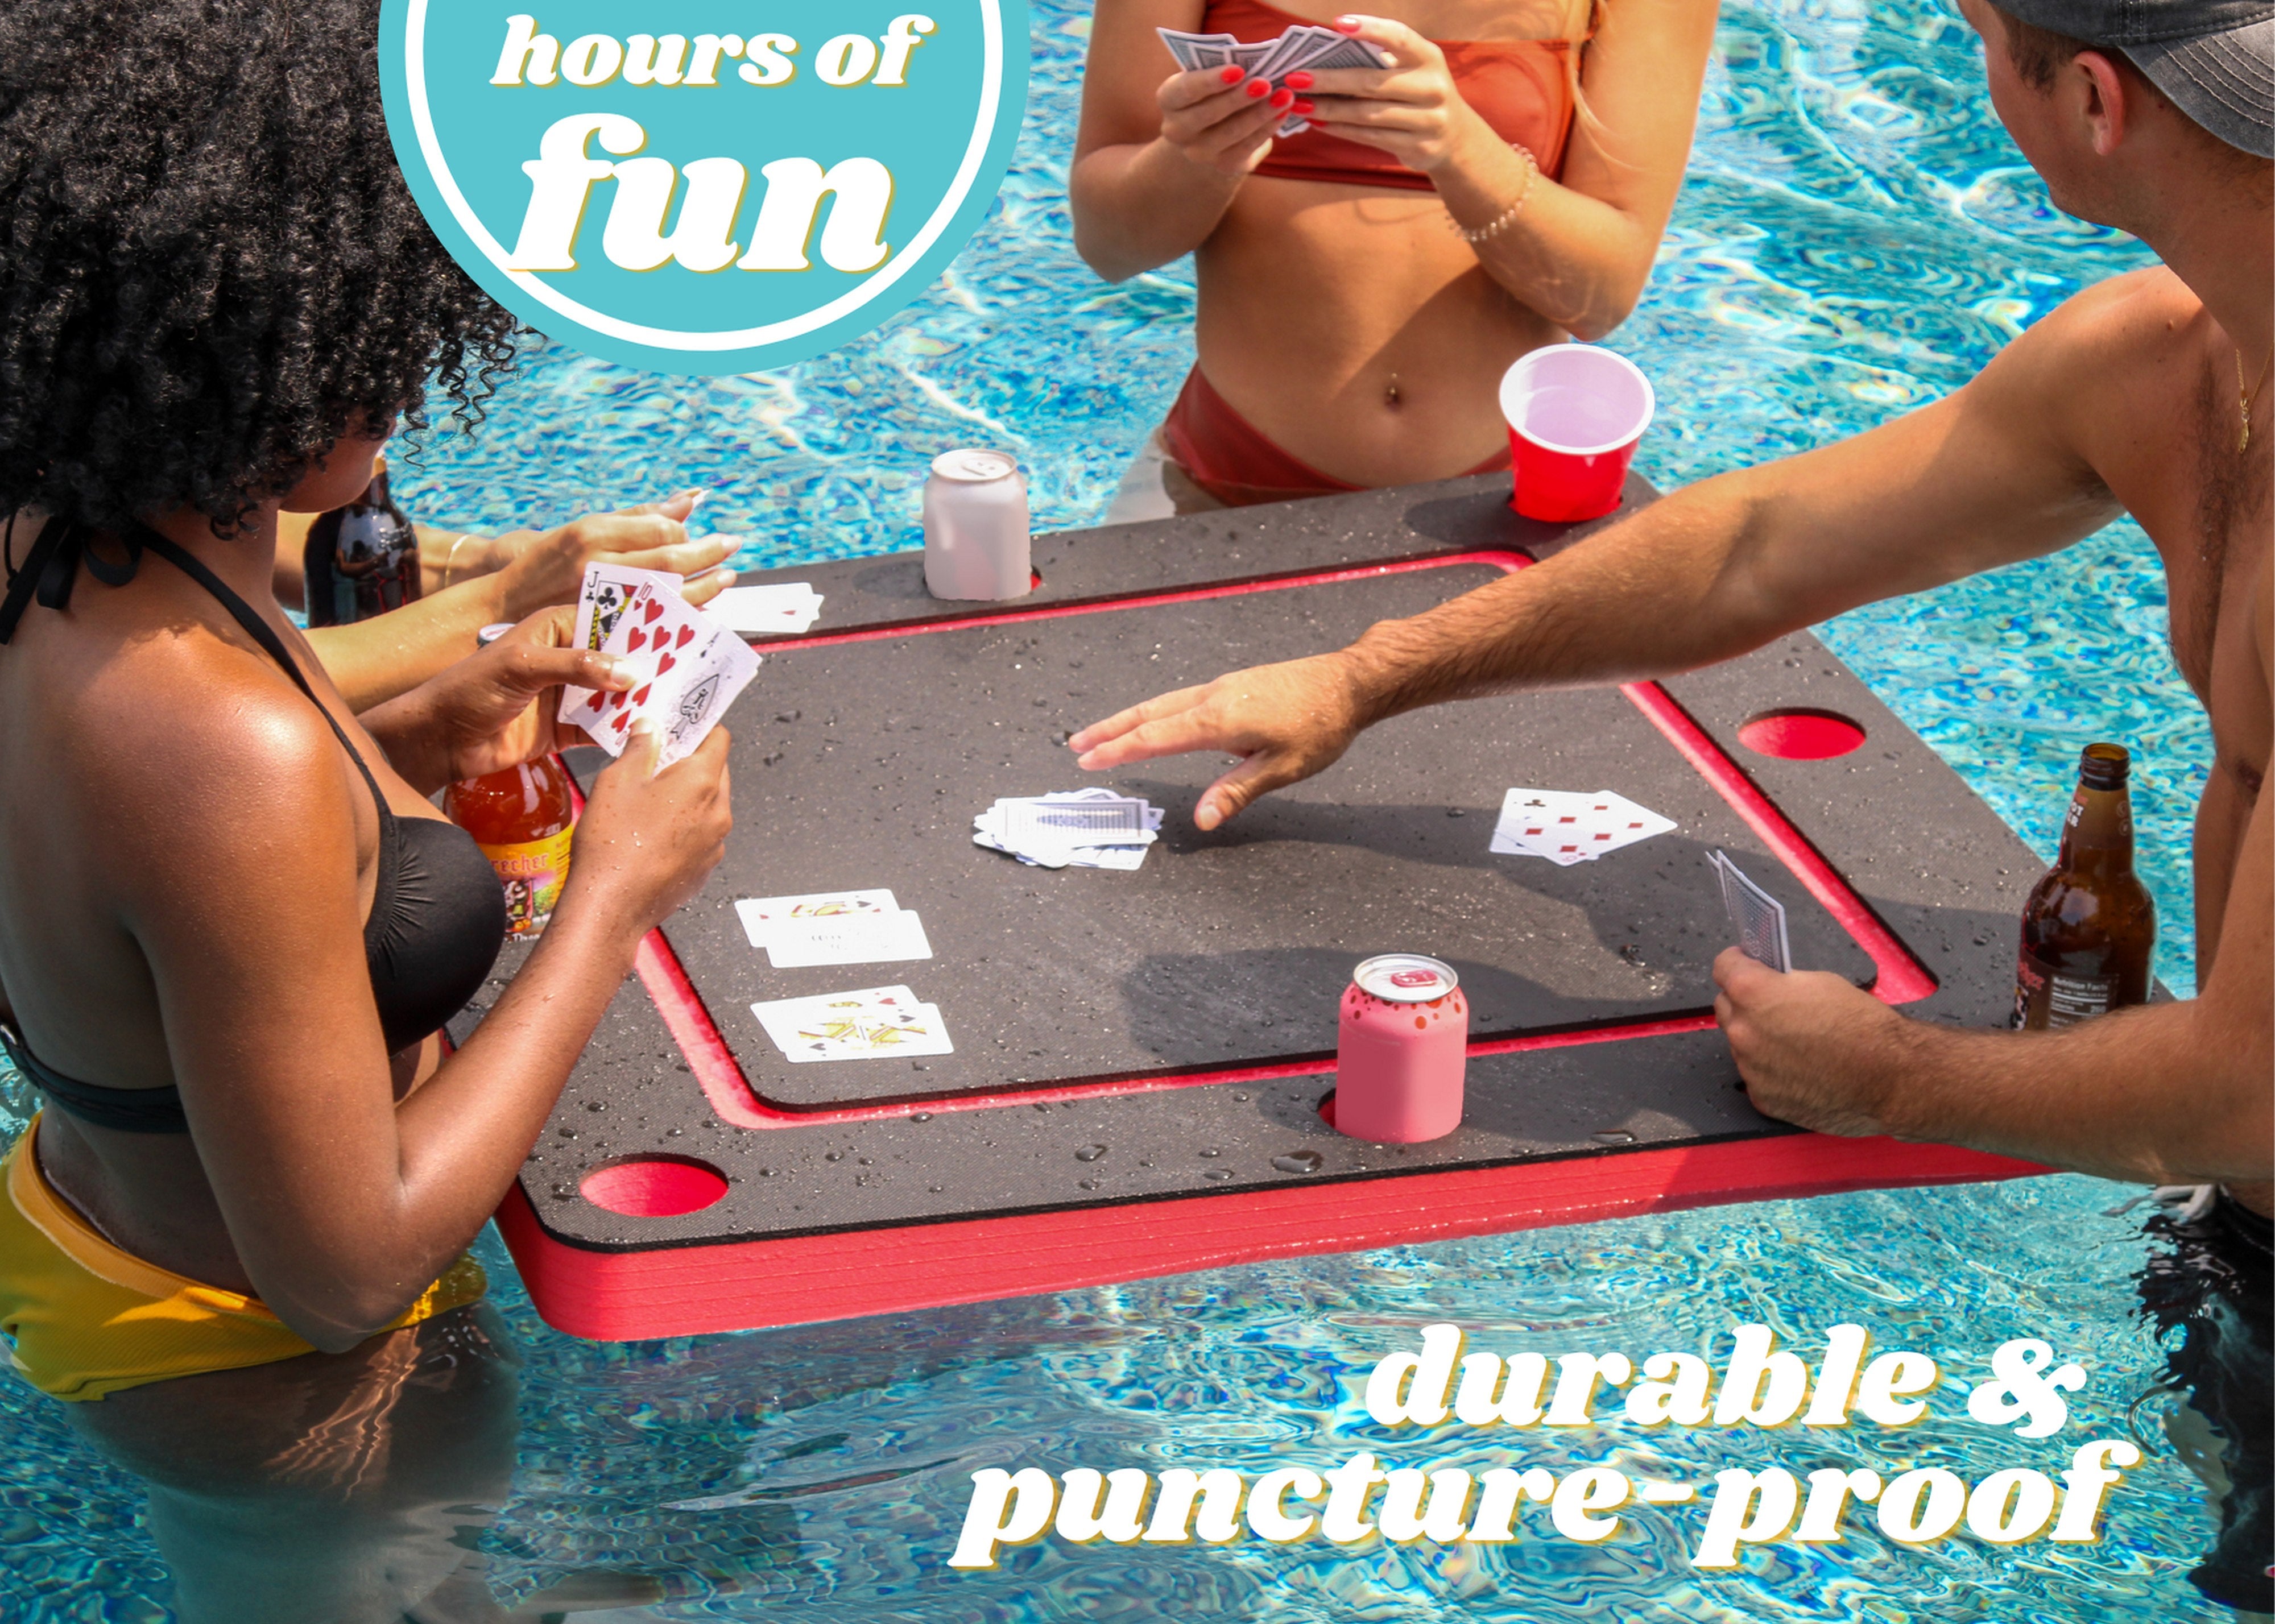 Floating GameCard Table Tray PoolBeach Party Float Lounge Durable Foam Large 36 Inch Drink Holders Waterproof Playing Cards Deck UV Resistant